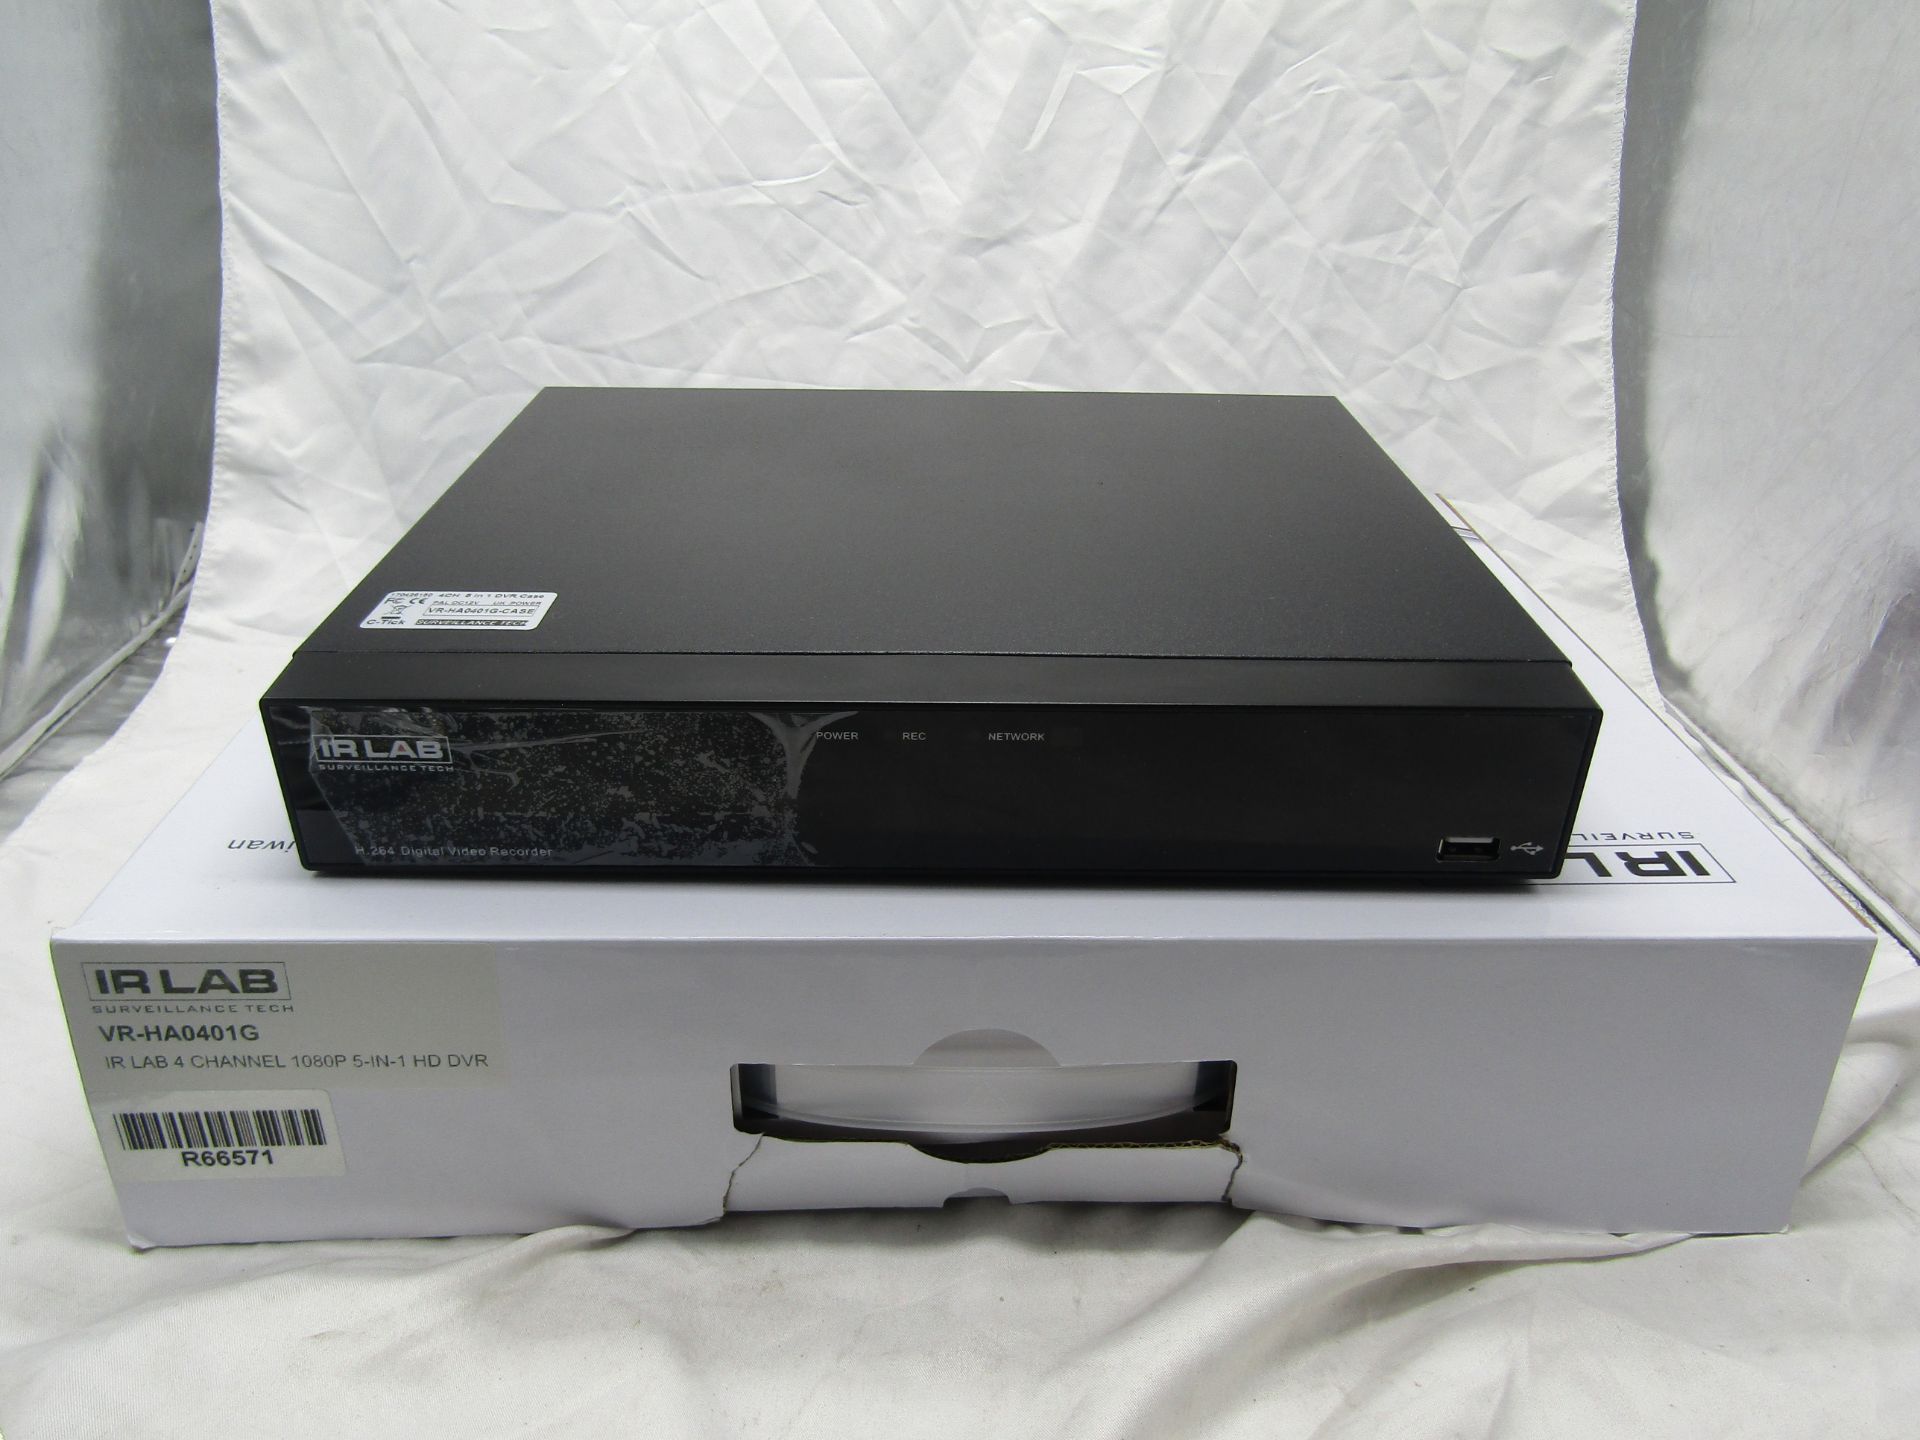 one lot of over 200 items of CCTV and Surveillance equipment, includes DVRs, Cameras, Thermal - Image 5 of 104